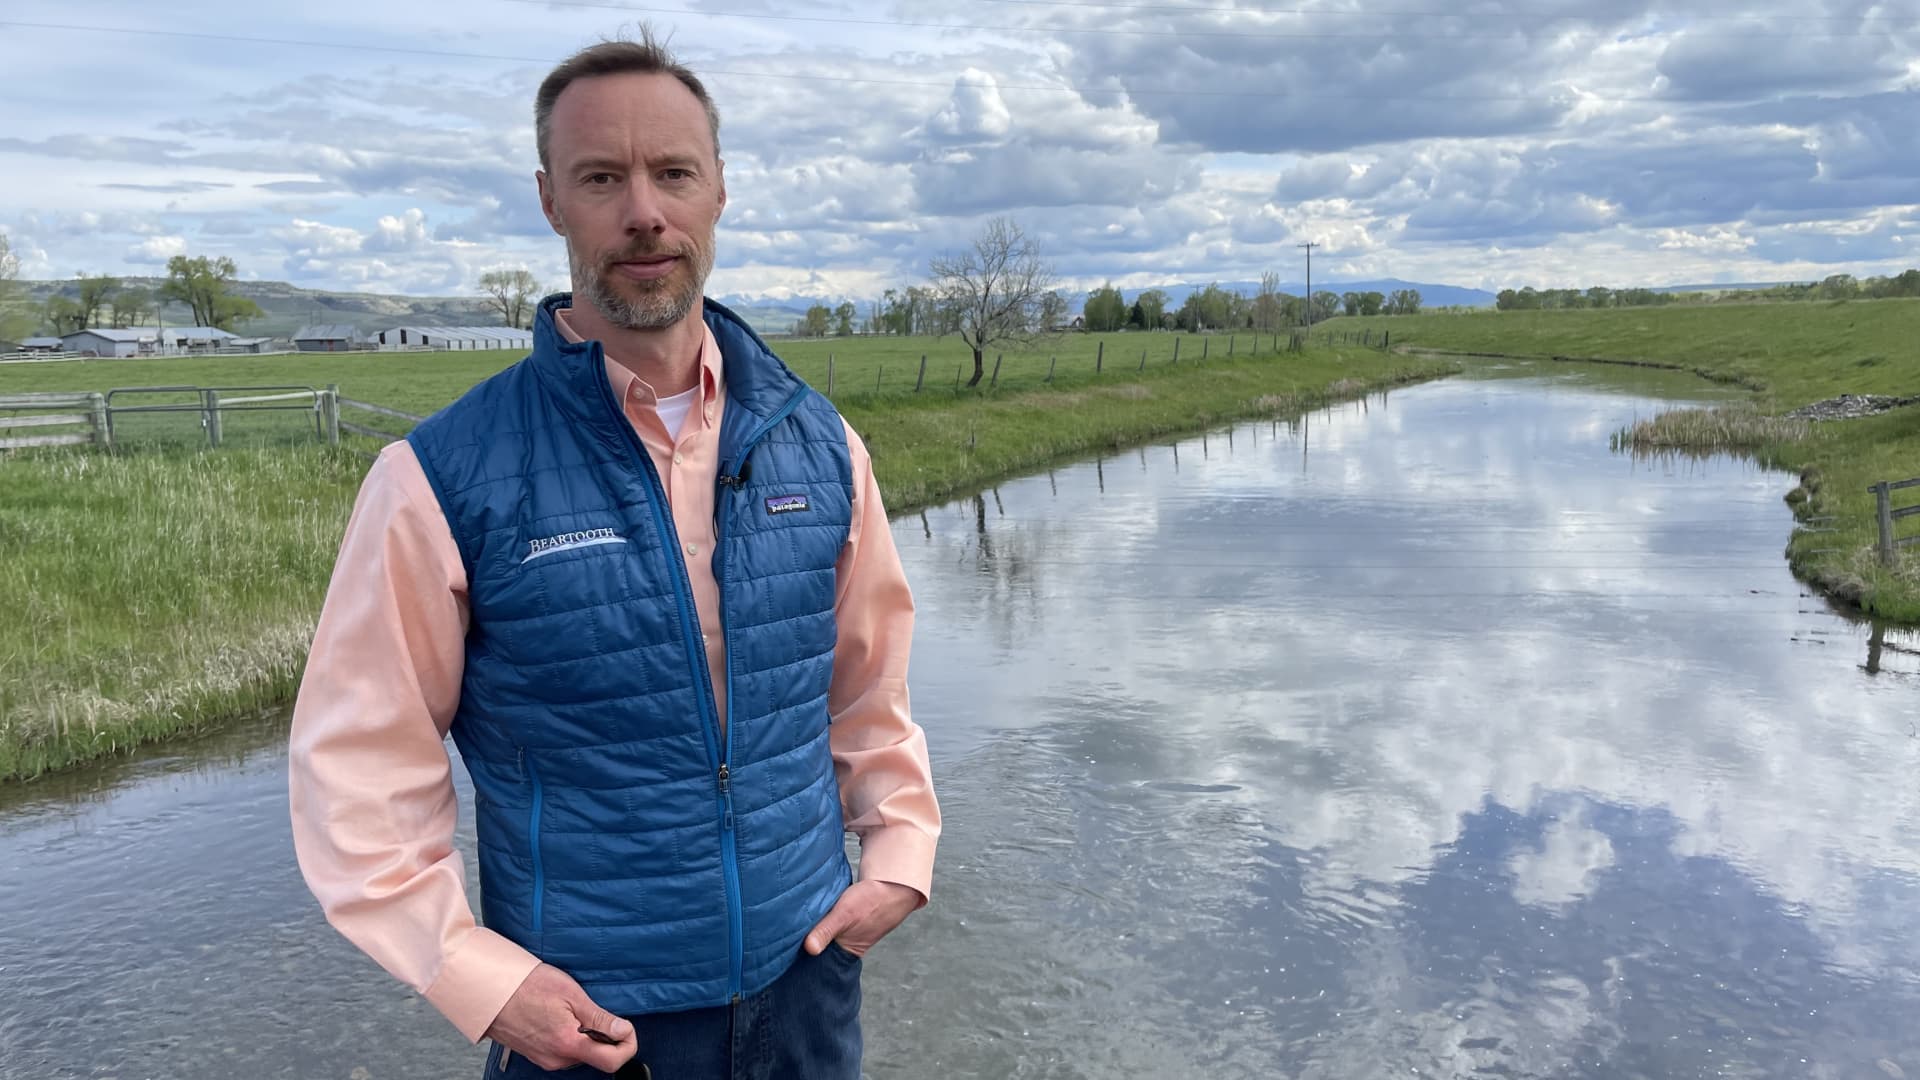 Montana Housing Prices Soar: Robert Keith, Founder of the Beartooth Group, rehabilitates damaged land and sells the restored ranches to conservation-minded buyers